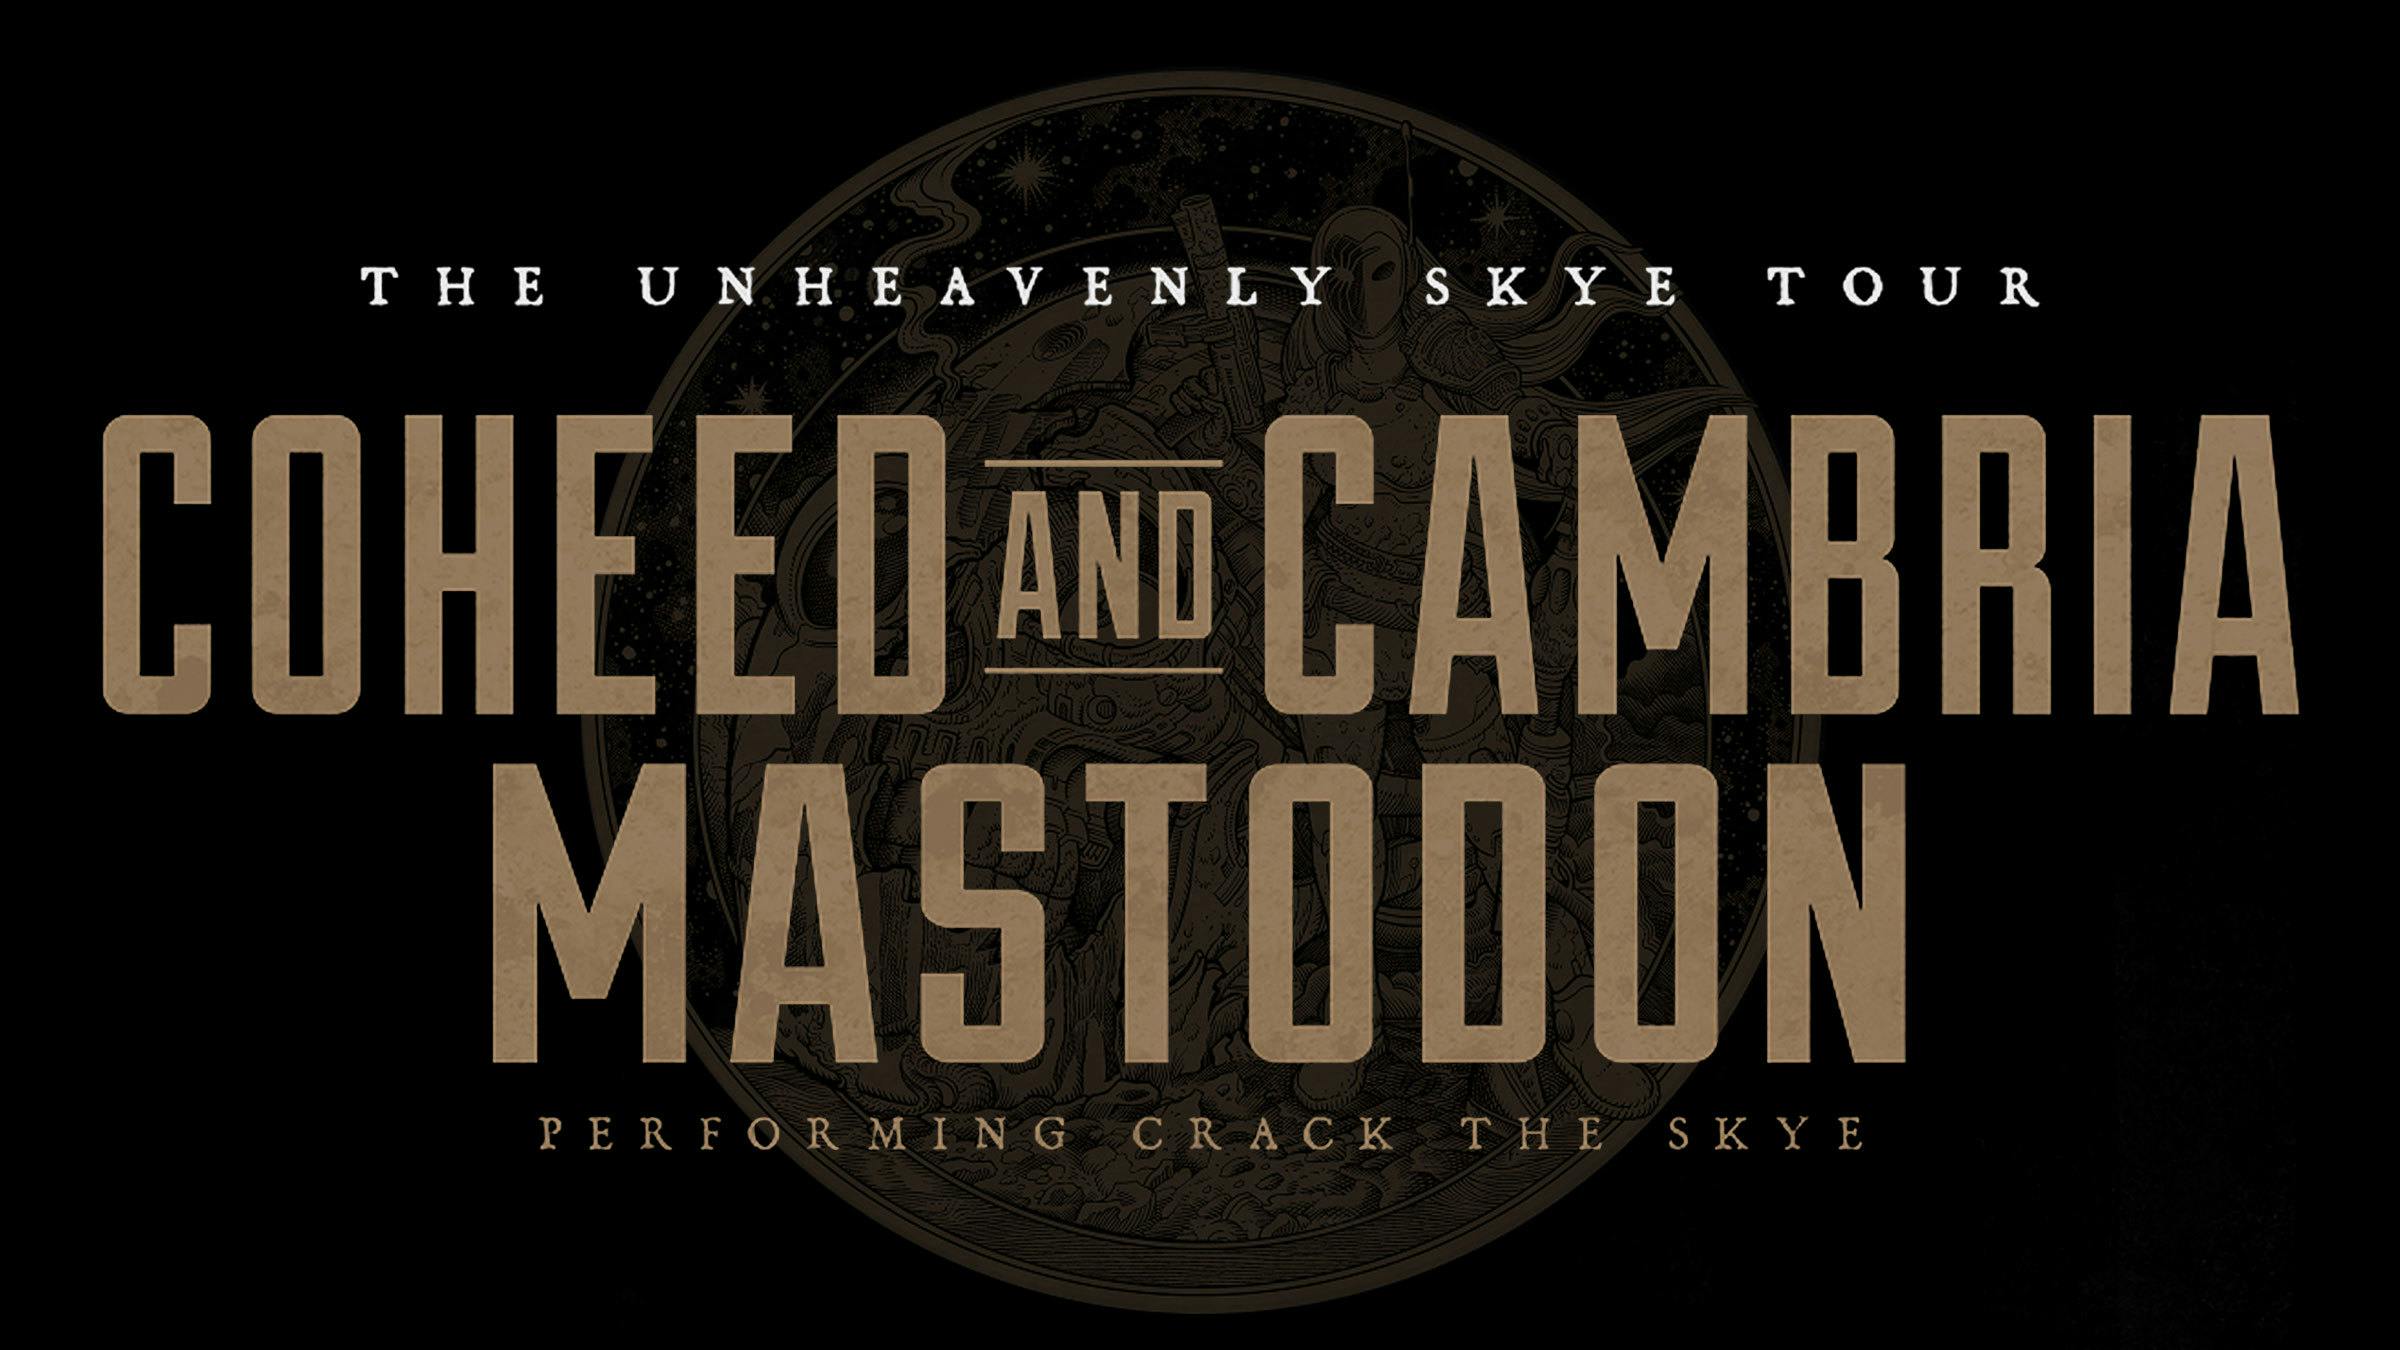 Mastodon, Coheed And Cambria, and Every Time I Die Announce U.S. Tour